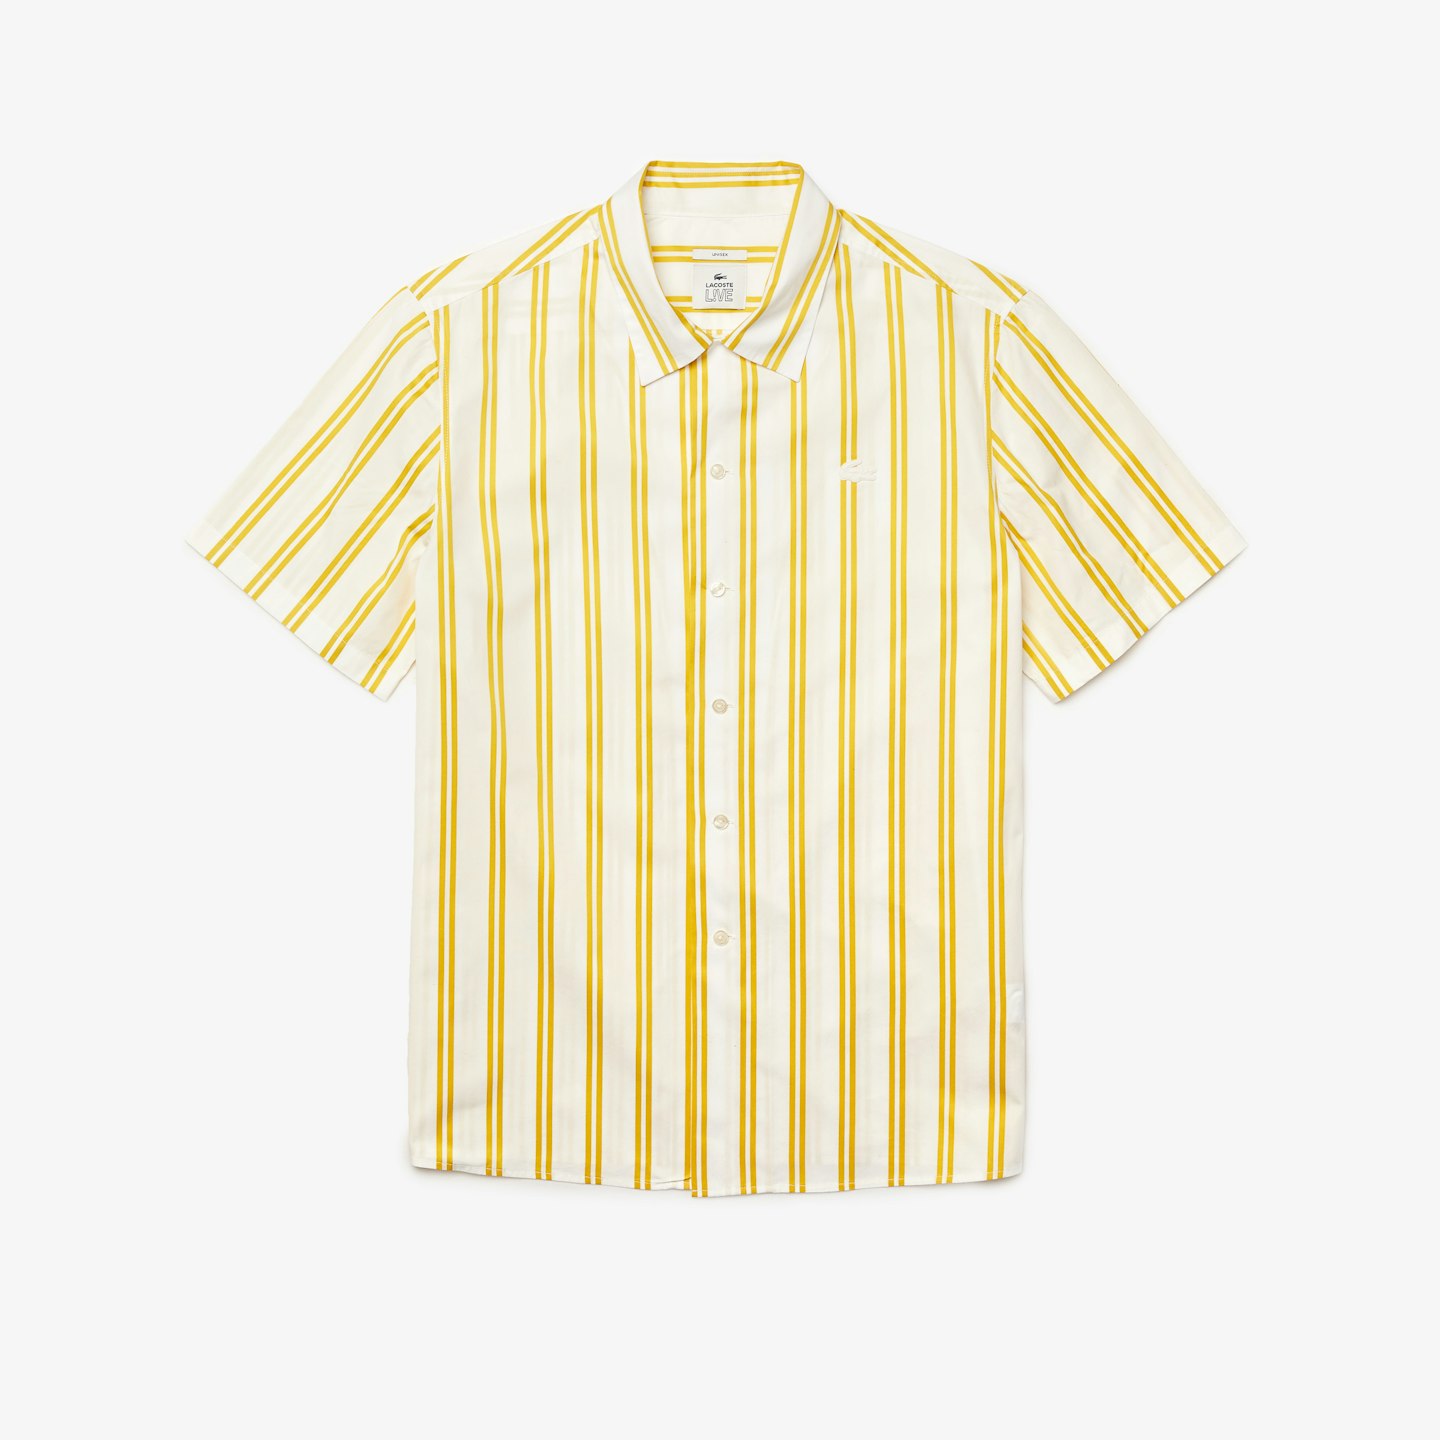 The Best Varsity Pieces - Lacoste Striped Shirt